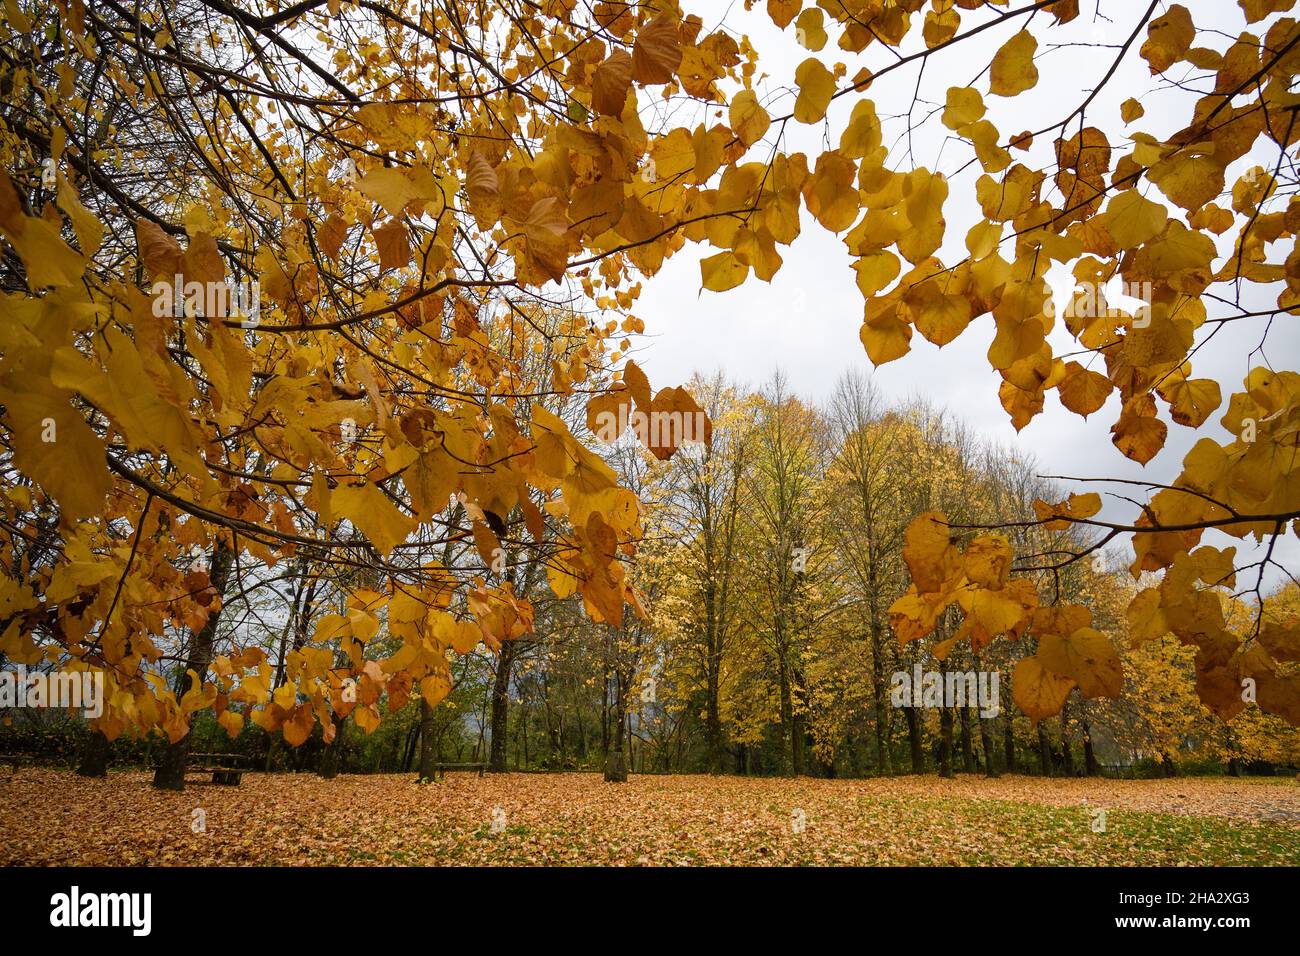 yellow linden leaves with trees in the background in autumn Stock Photo